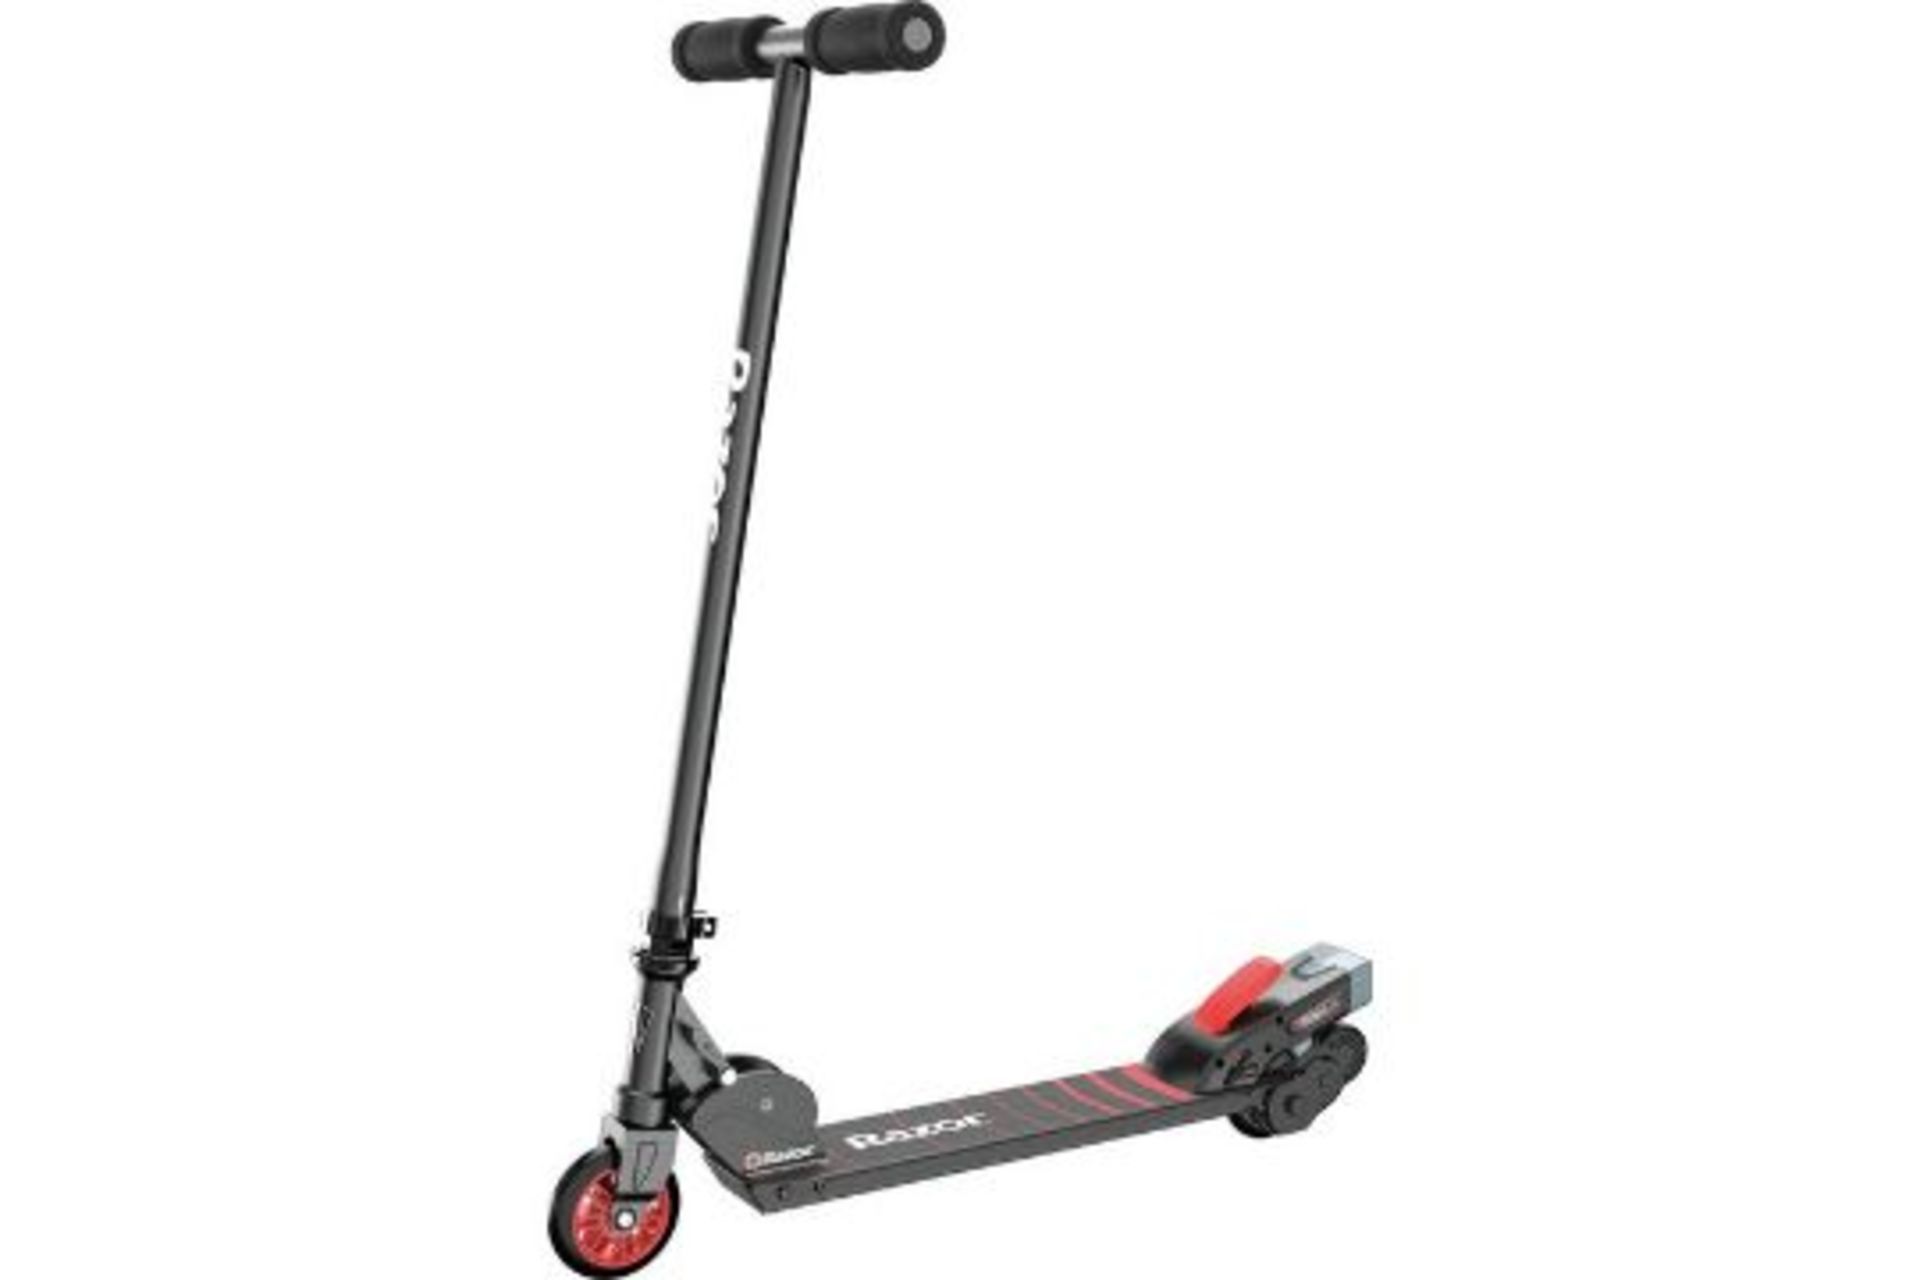 (ex114) Razor Turbo A Black Label Electric Scooter RRP £175.00. Simply step on and kick off to